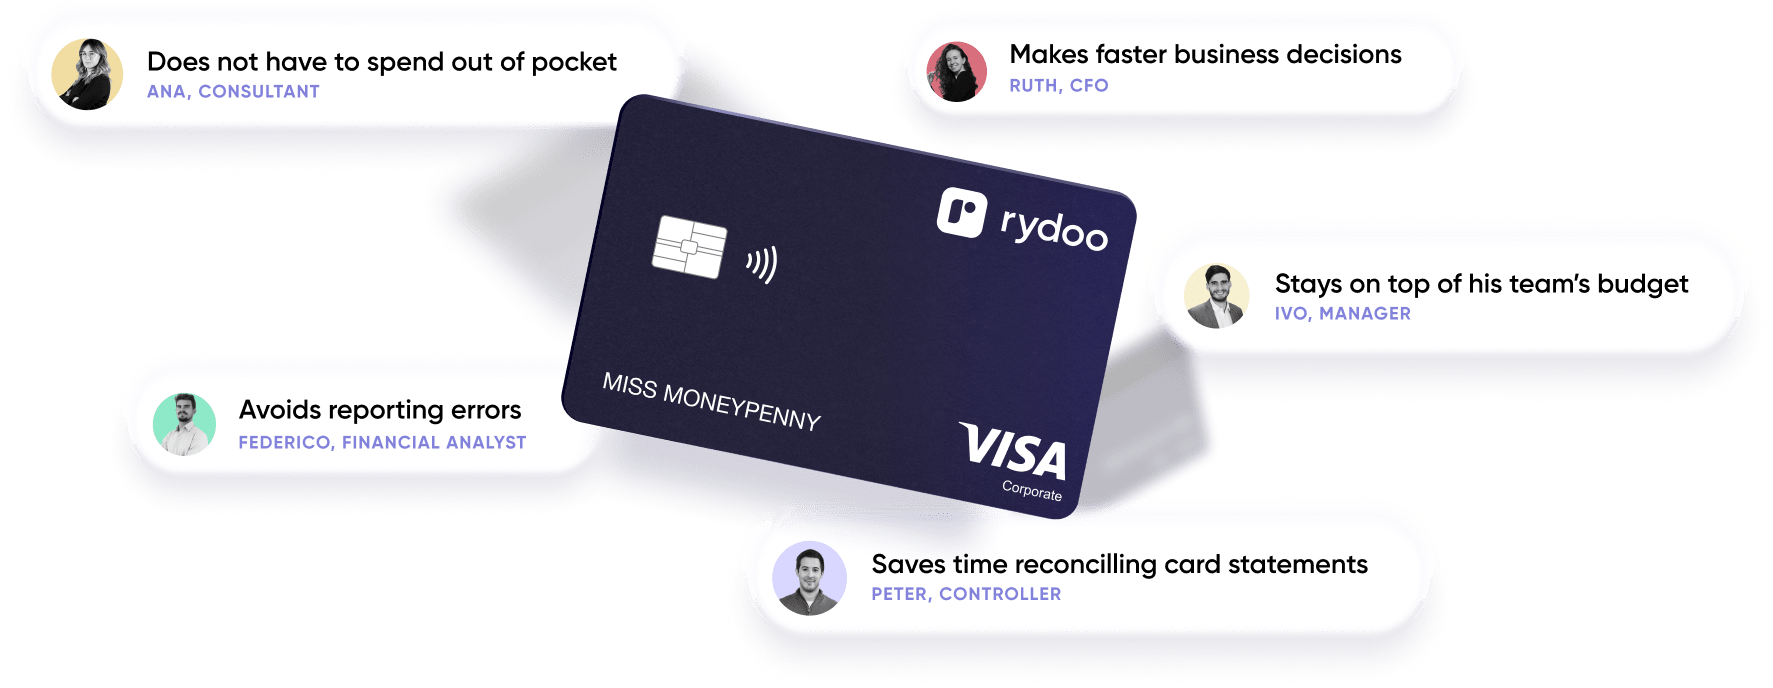 Rydoo expense cards - only for active users graph visa-corporate